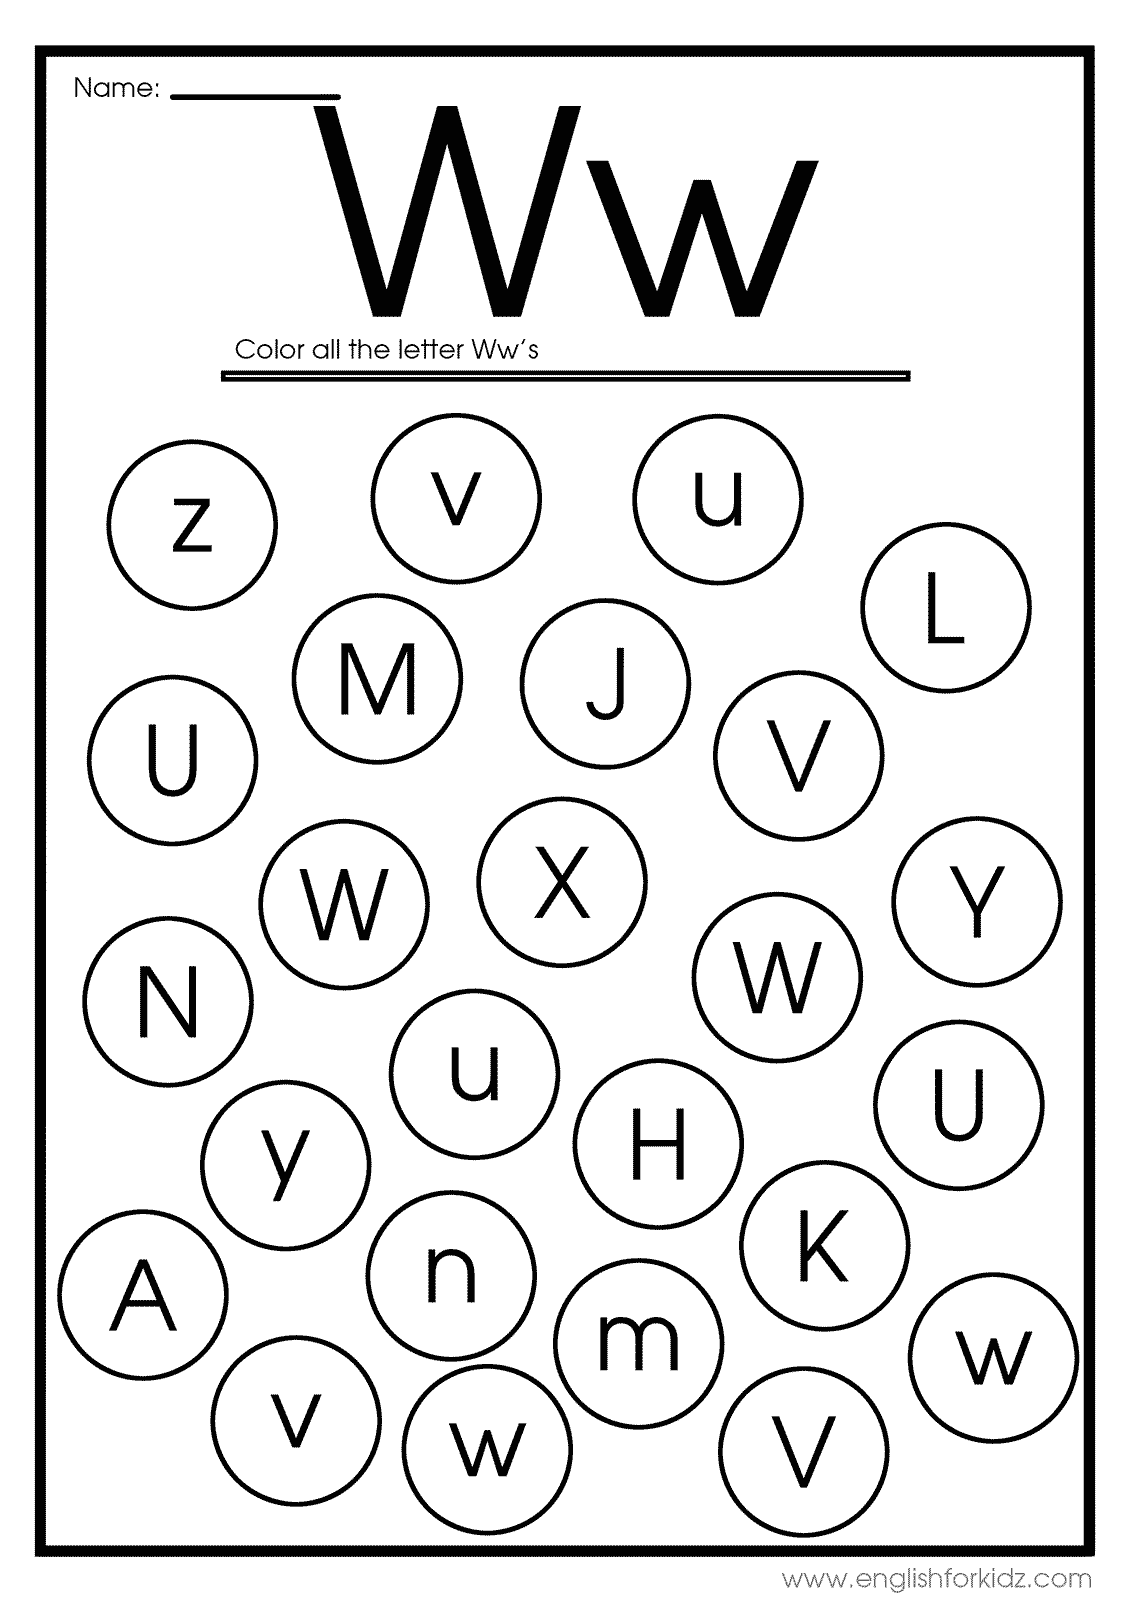 English for kids step by step letter w worksheets flash cards coloring pages